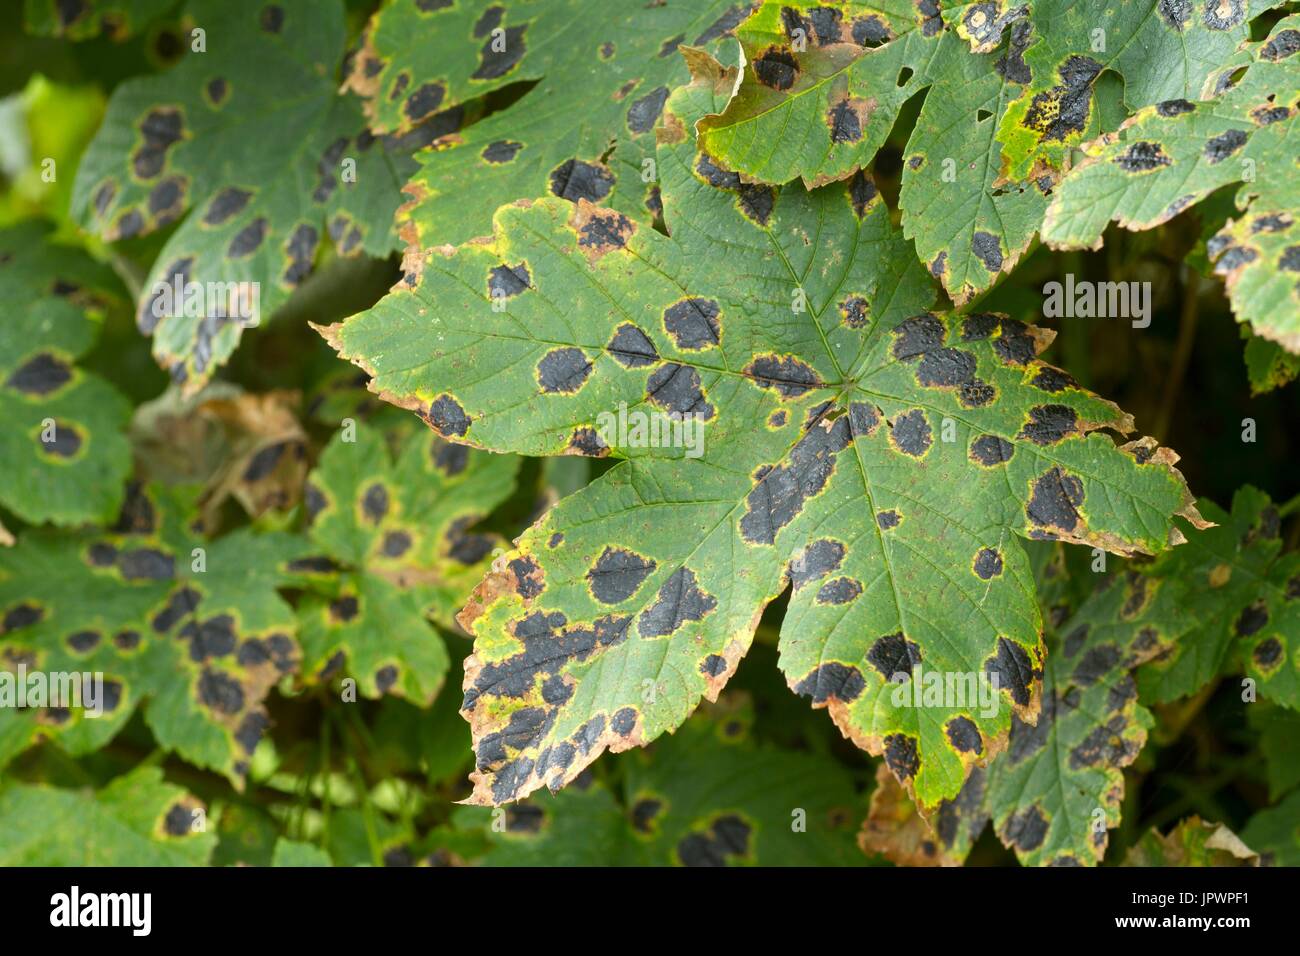 Tar spots on sycamore maple leaves in a garden Stock Photo